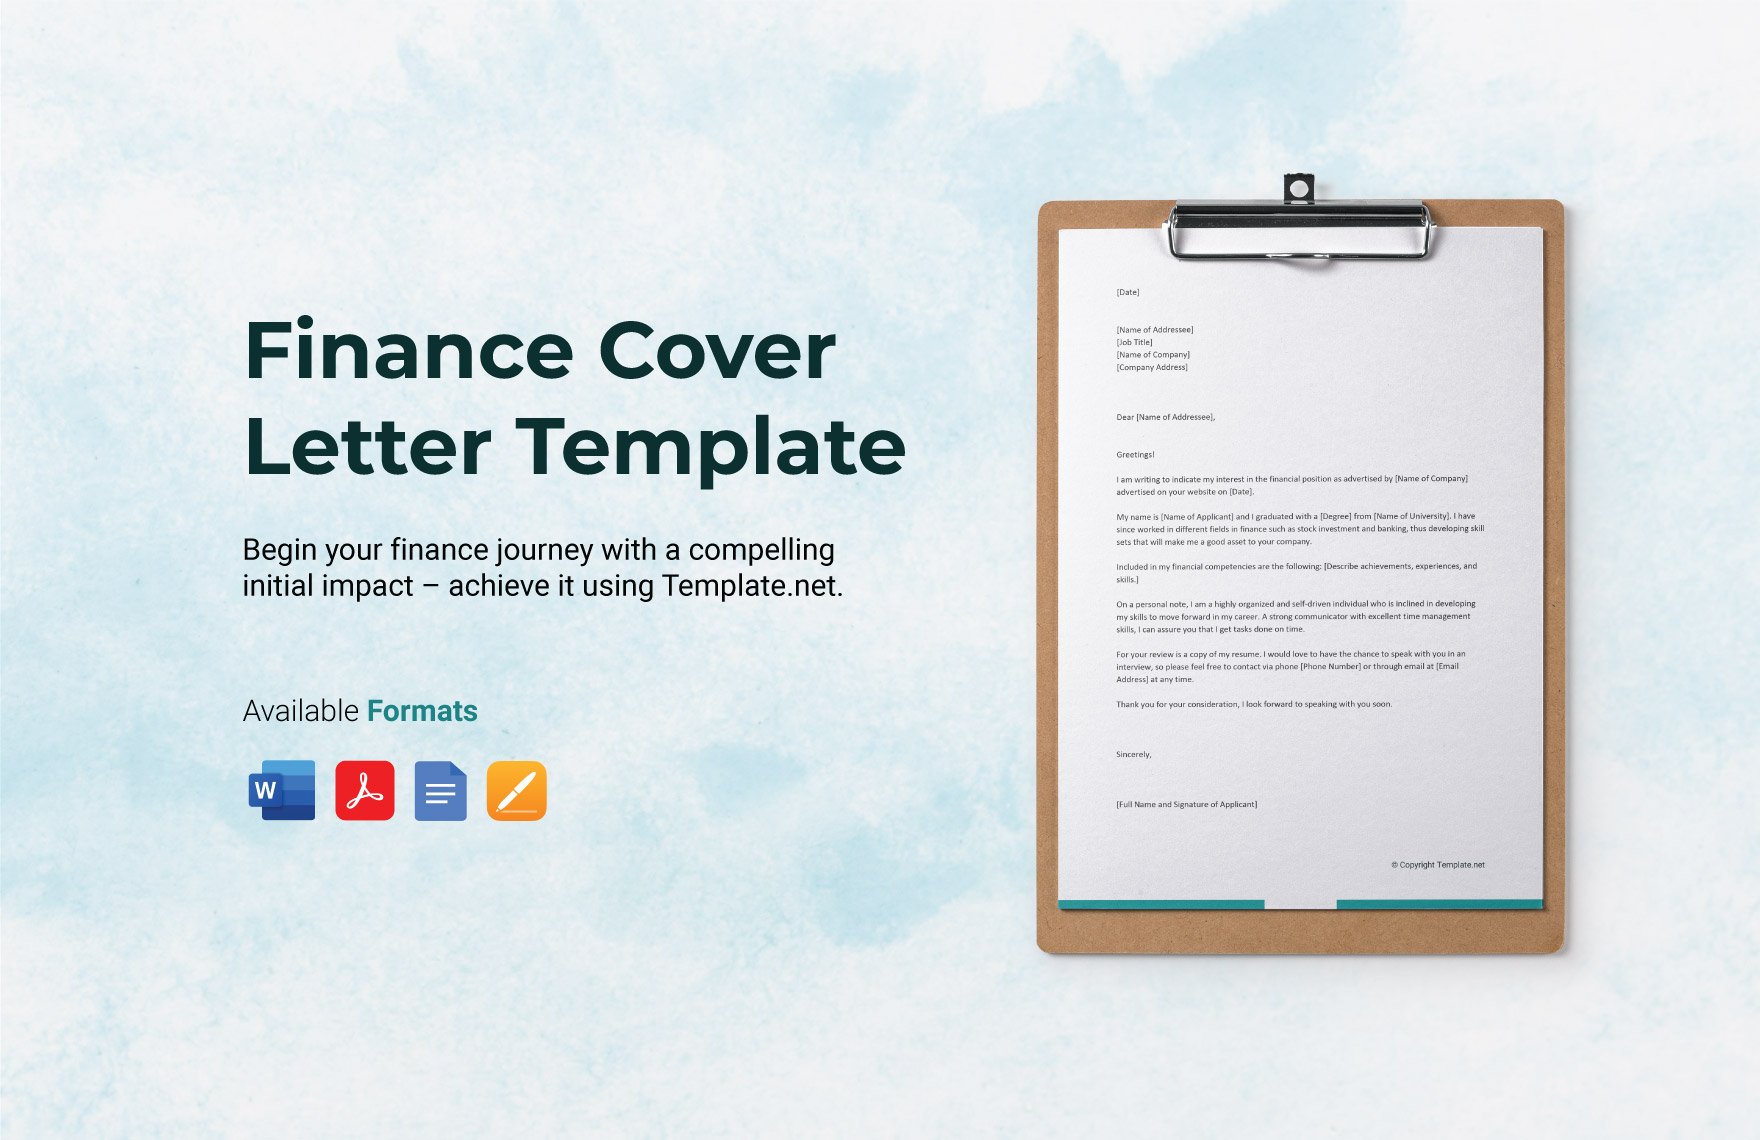 Finance Cover Letter Template